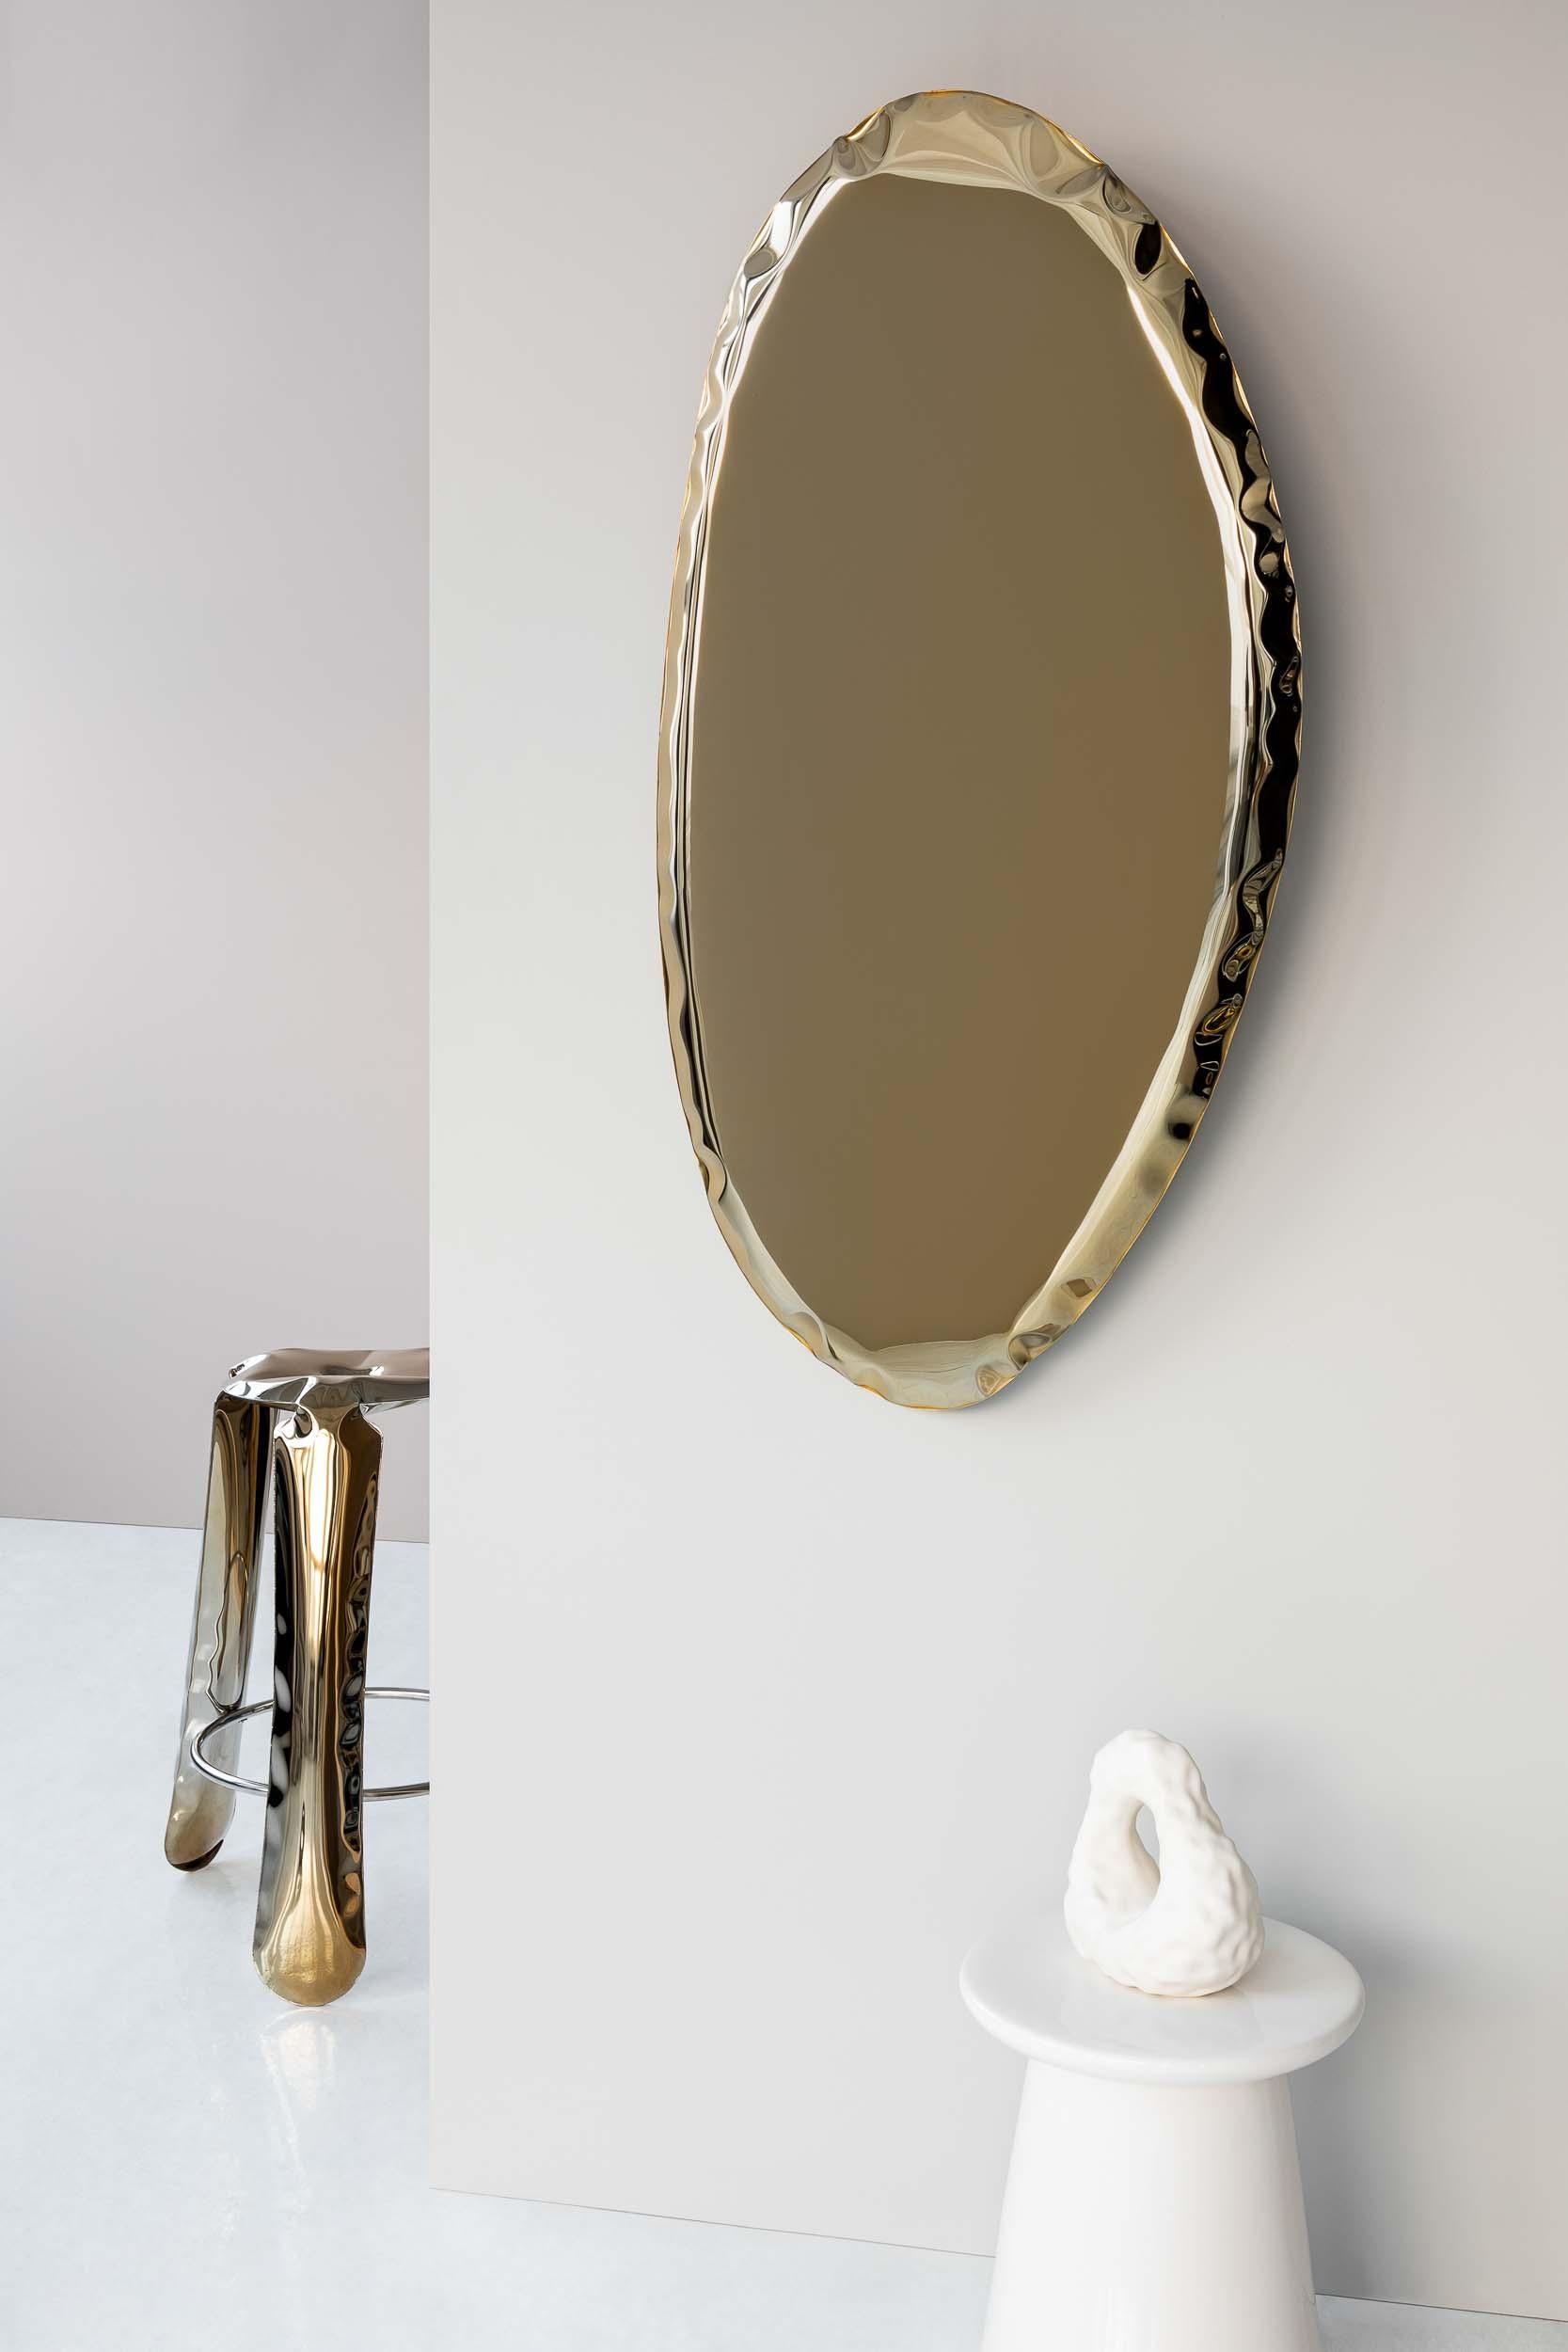 Contemporary Mirror 'Tafla O2', AURUM Collection, Light Gold, by Zieta In New Condition For Sale In Paris, FR